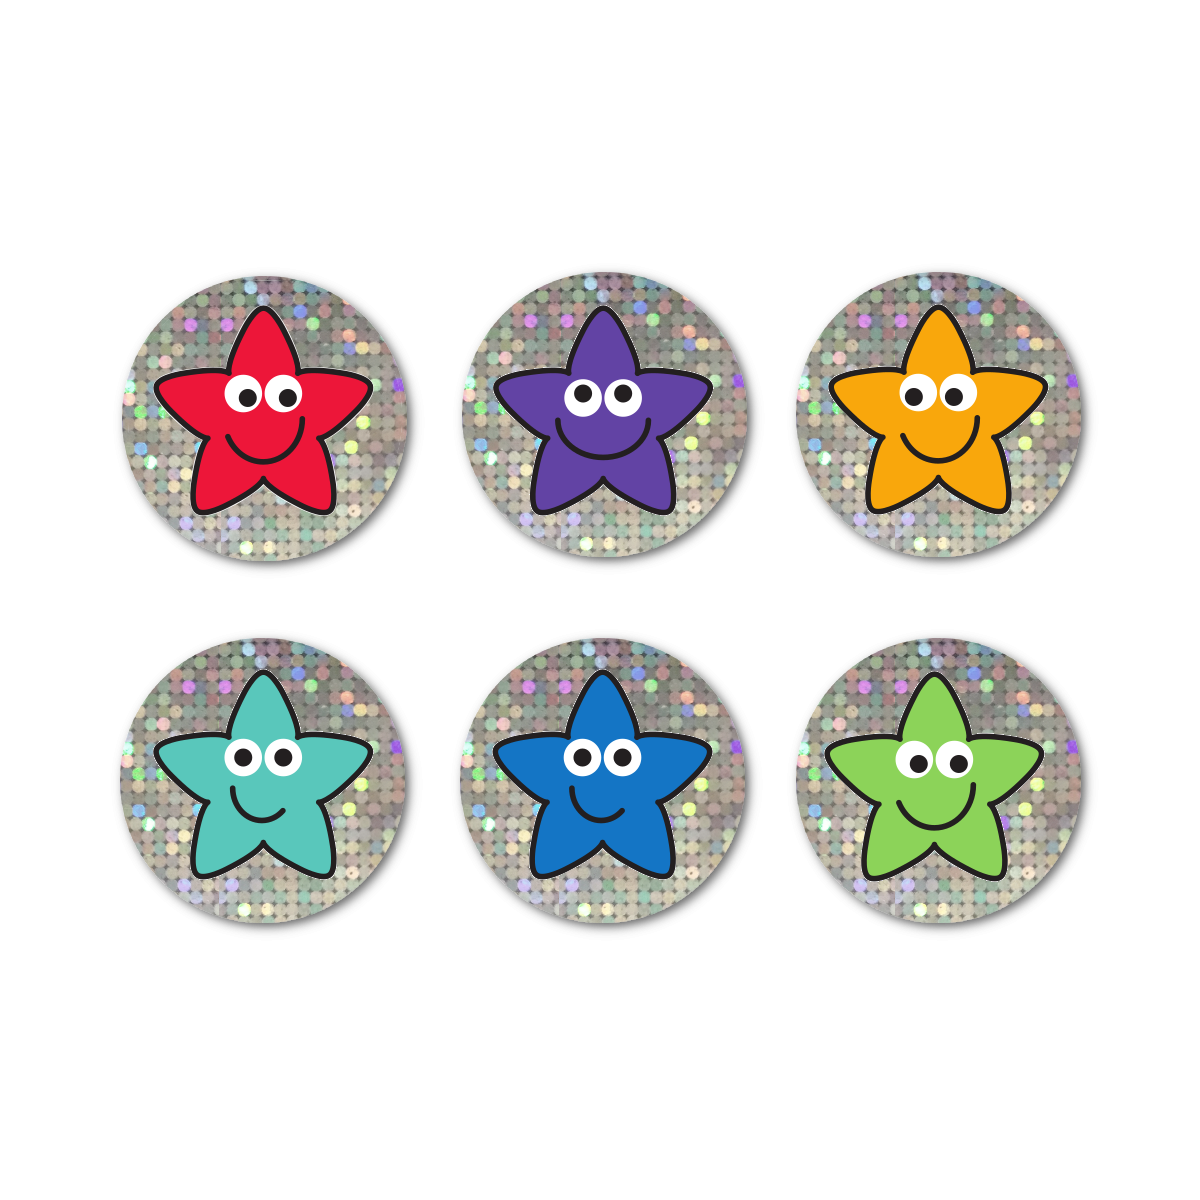 Sparkly Coloured Star Stickers - (140 Stickers - 20mm)